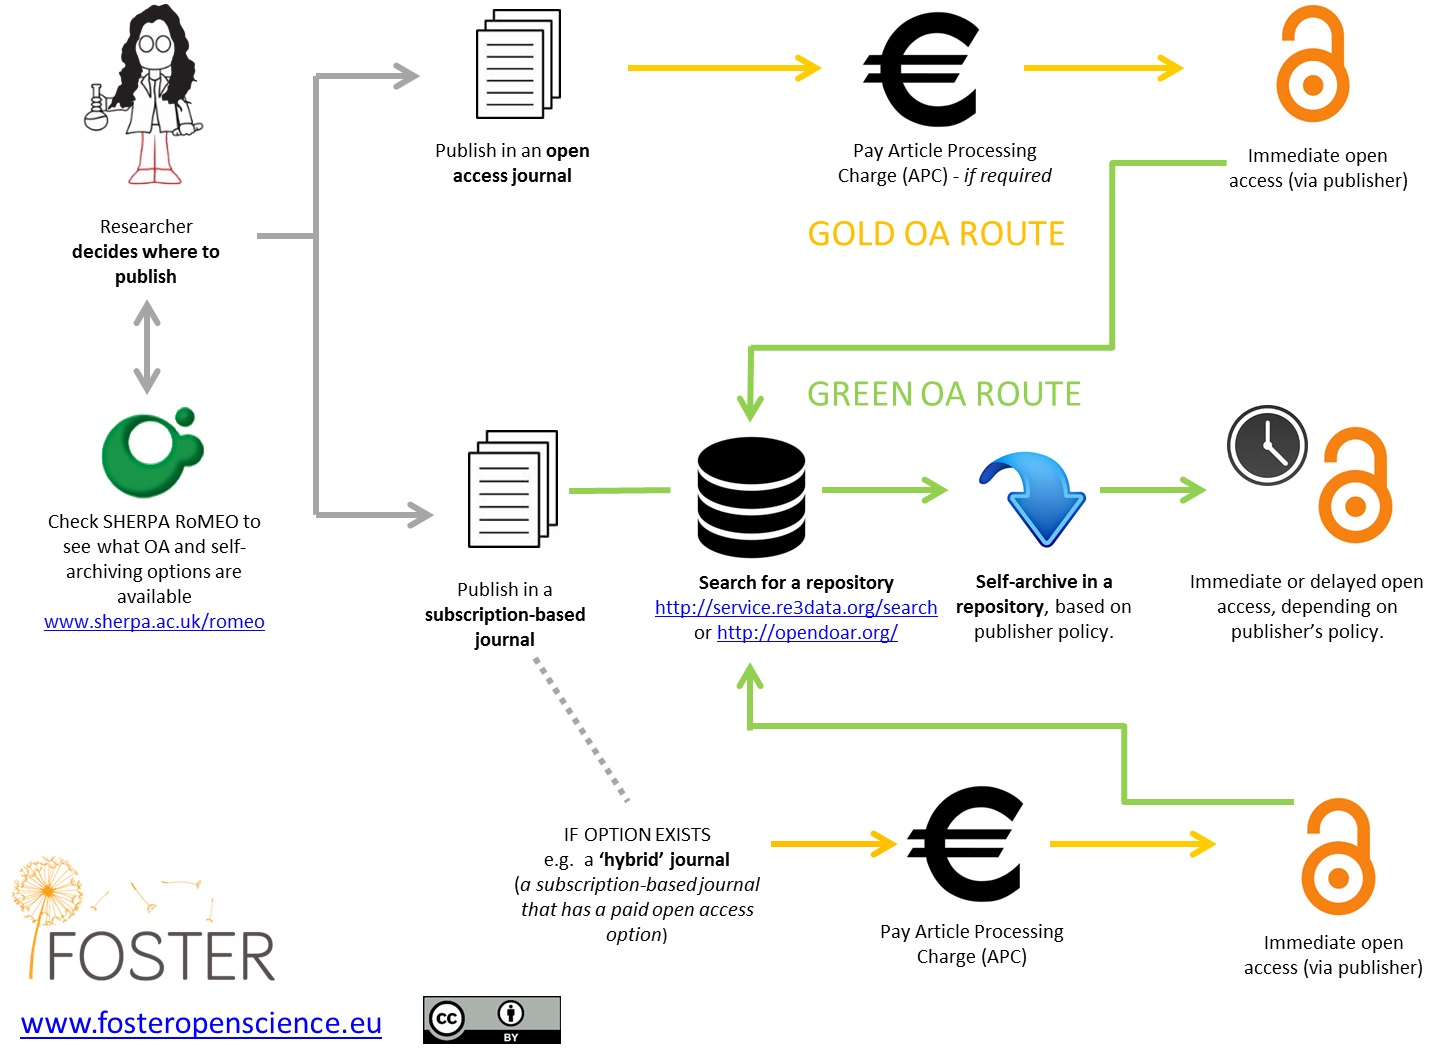 Graphical representation of the routes to open access publication, enlarged view.